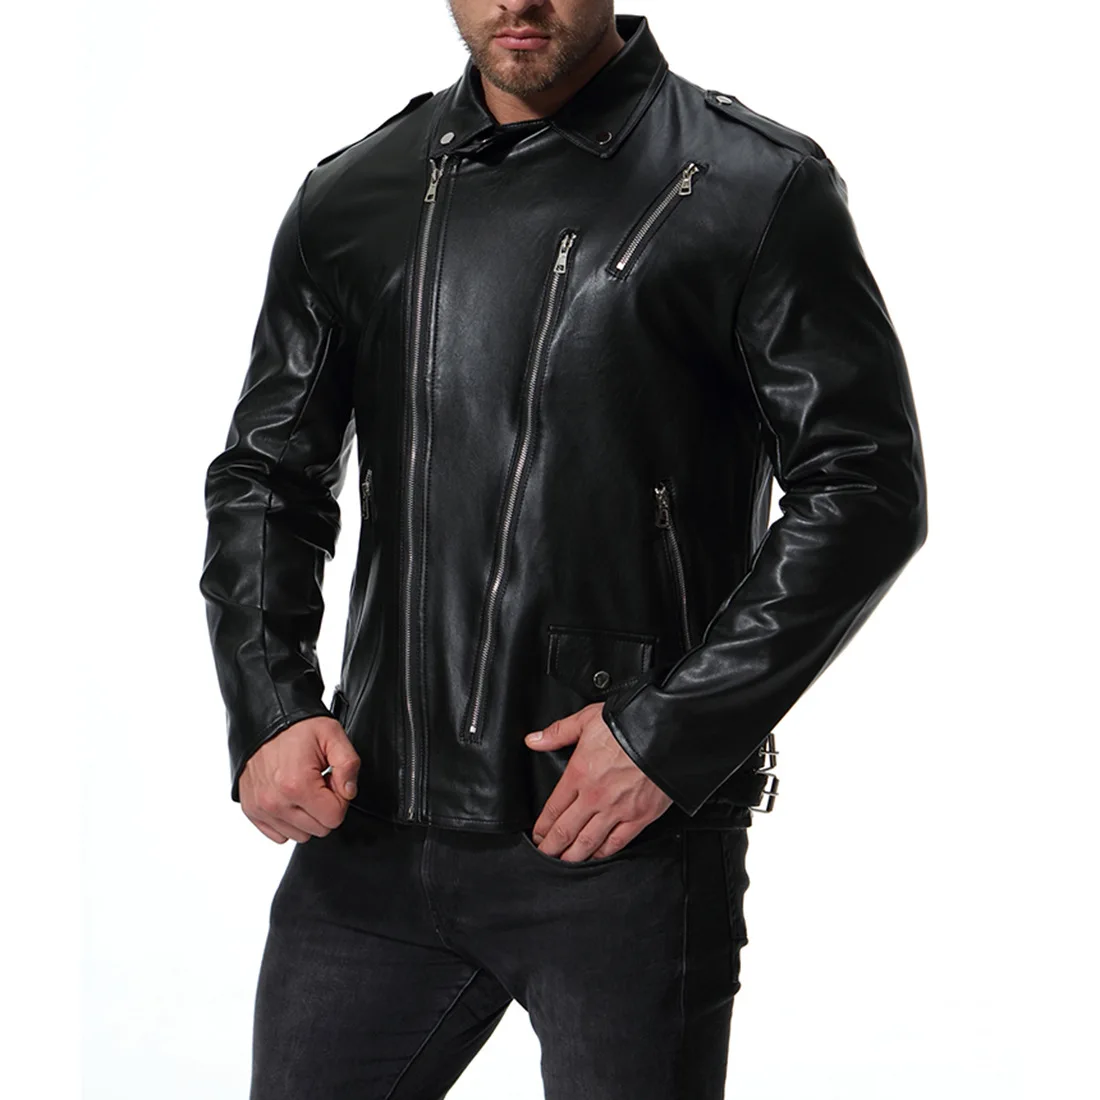 Motorcycle Leather Jacket Urban Casual Vintage ColdProof Oversized Moto Sporting Mens Motorbike Riding Jackets